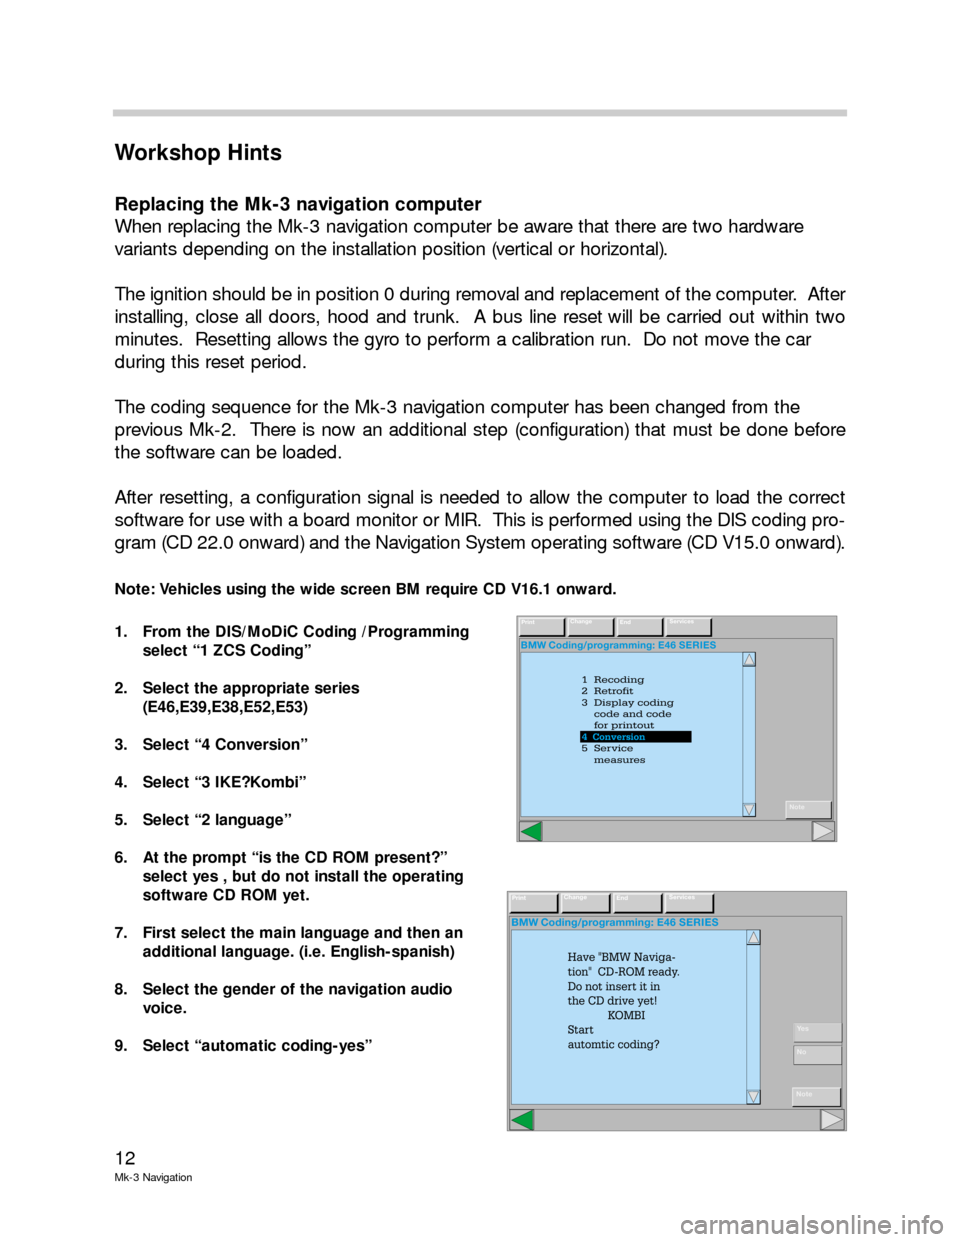 BMW 7 SERIES 2000 E38 Mk3 Navigation System Manual 12
Mk-3 Navigation
Workshop Hints
Replacing the Mk-3 navigation computer
When replacing the Mk-3 navigation computer be aware that there are two hardware 
variants depending on the installation positi